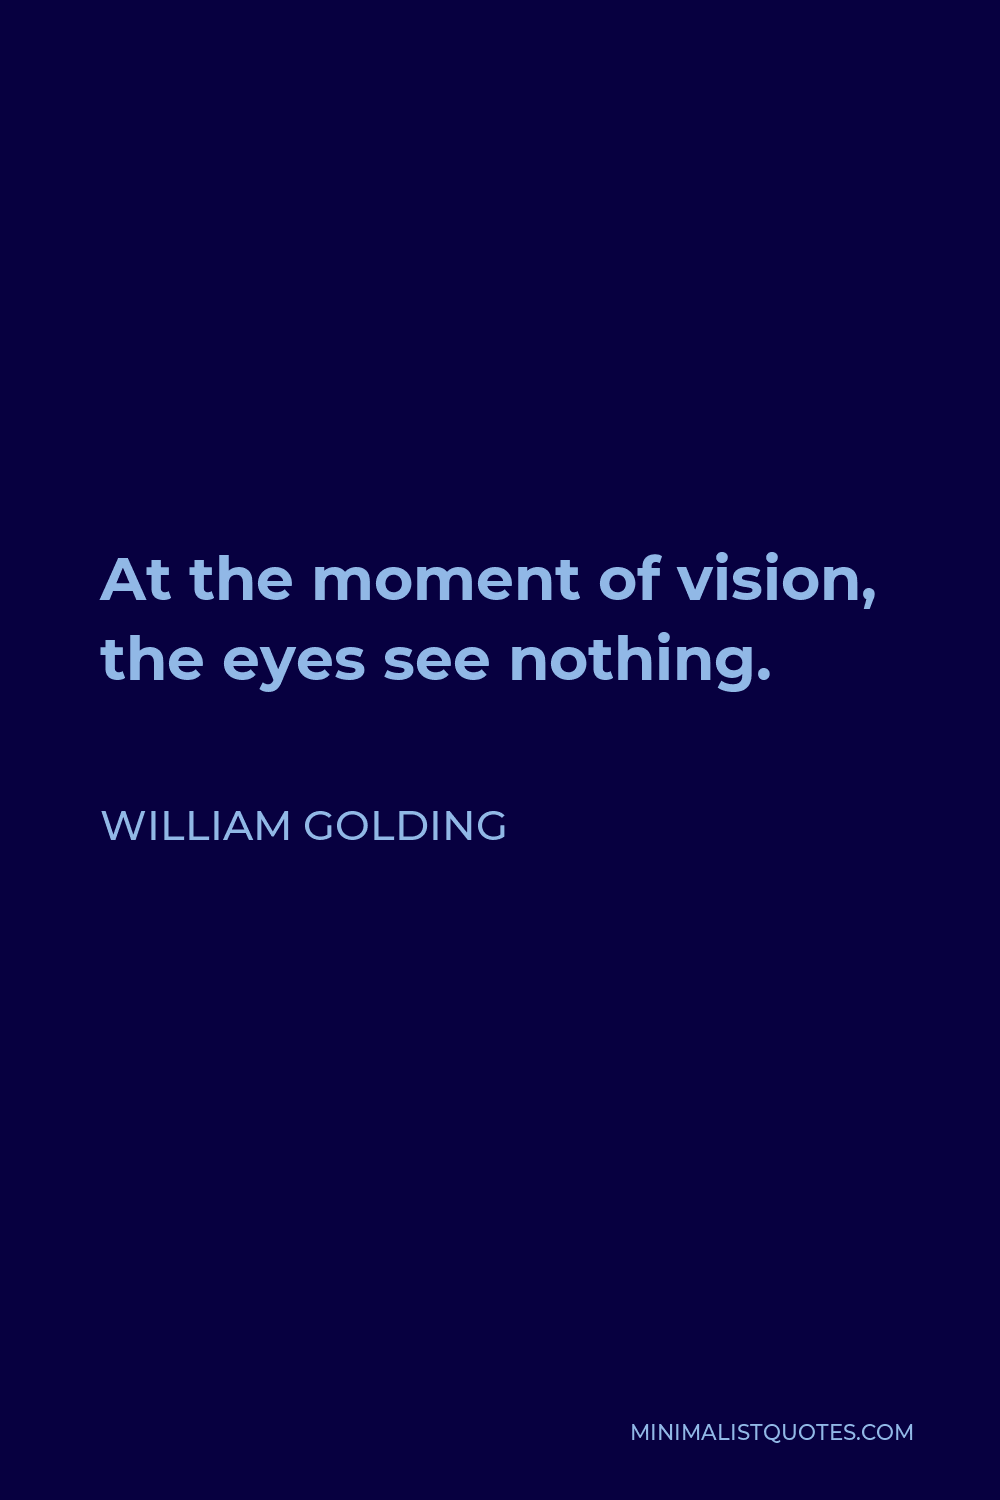 William Golding Quote - At the moment of vision, the eyes see nothing.